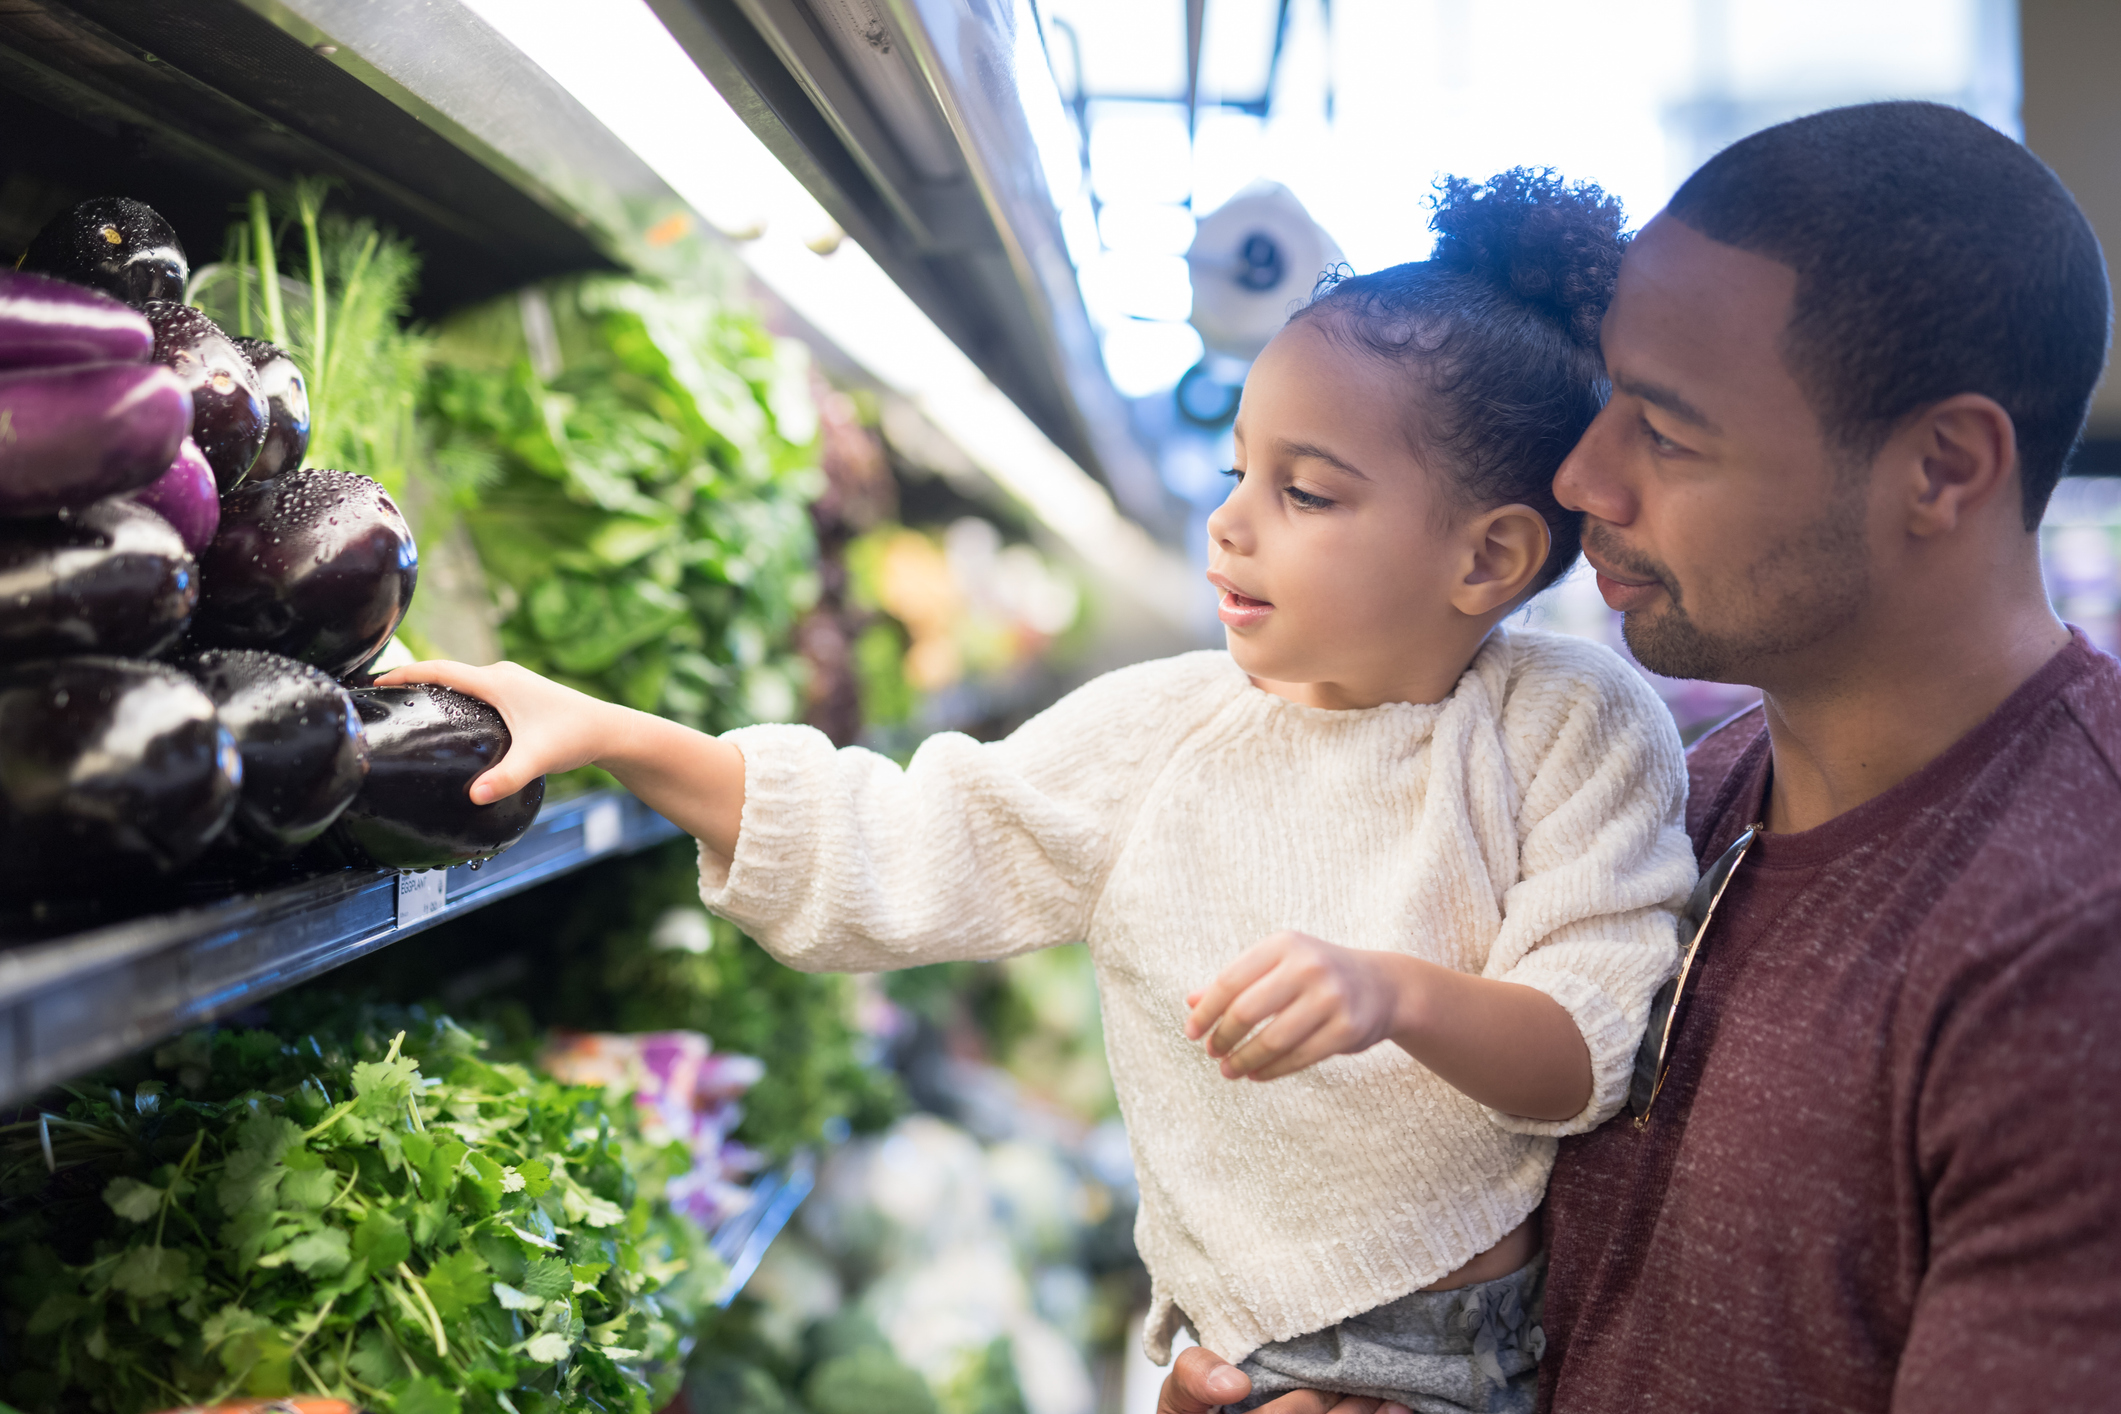 A father with medium-dark skin tone hold his daughter with medium skin tone at a grocery store while she picks out produce.